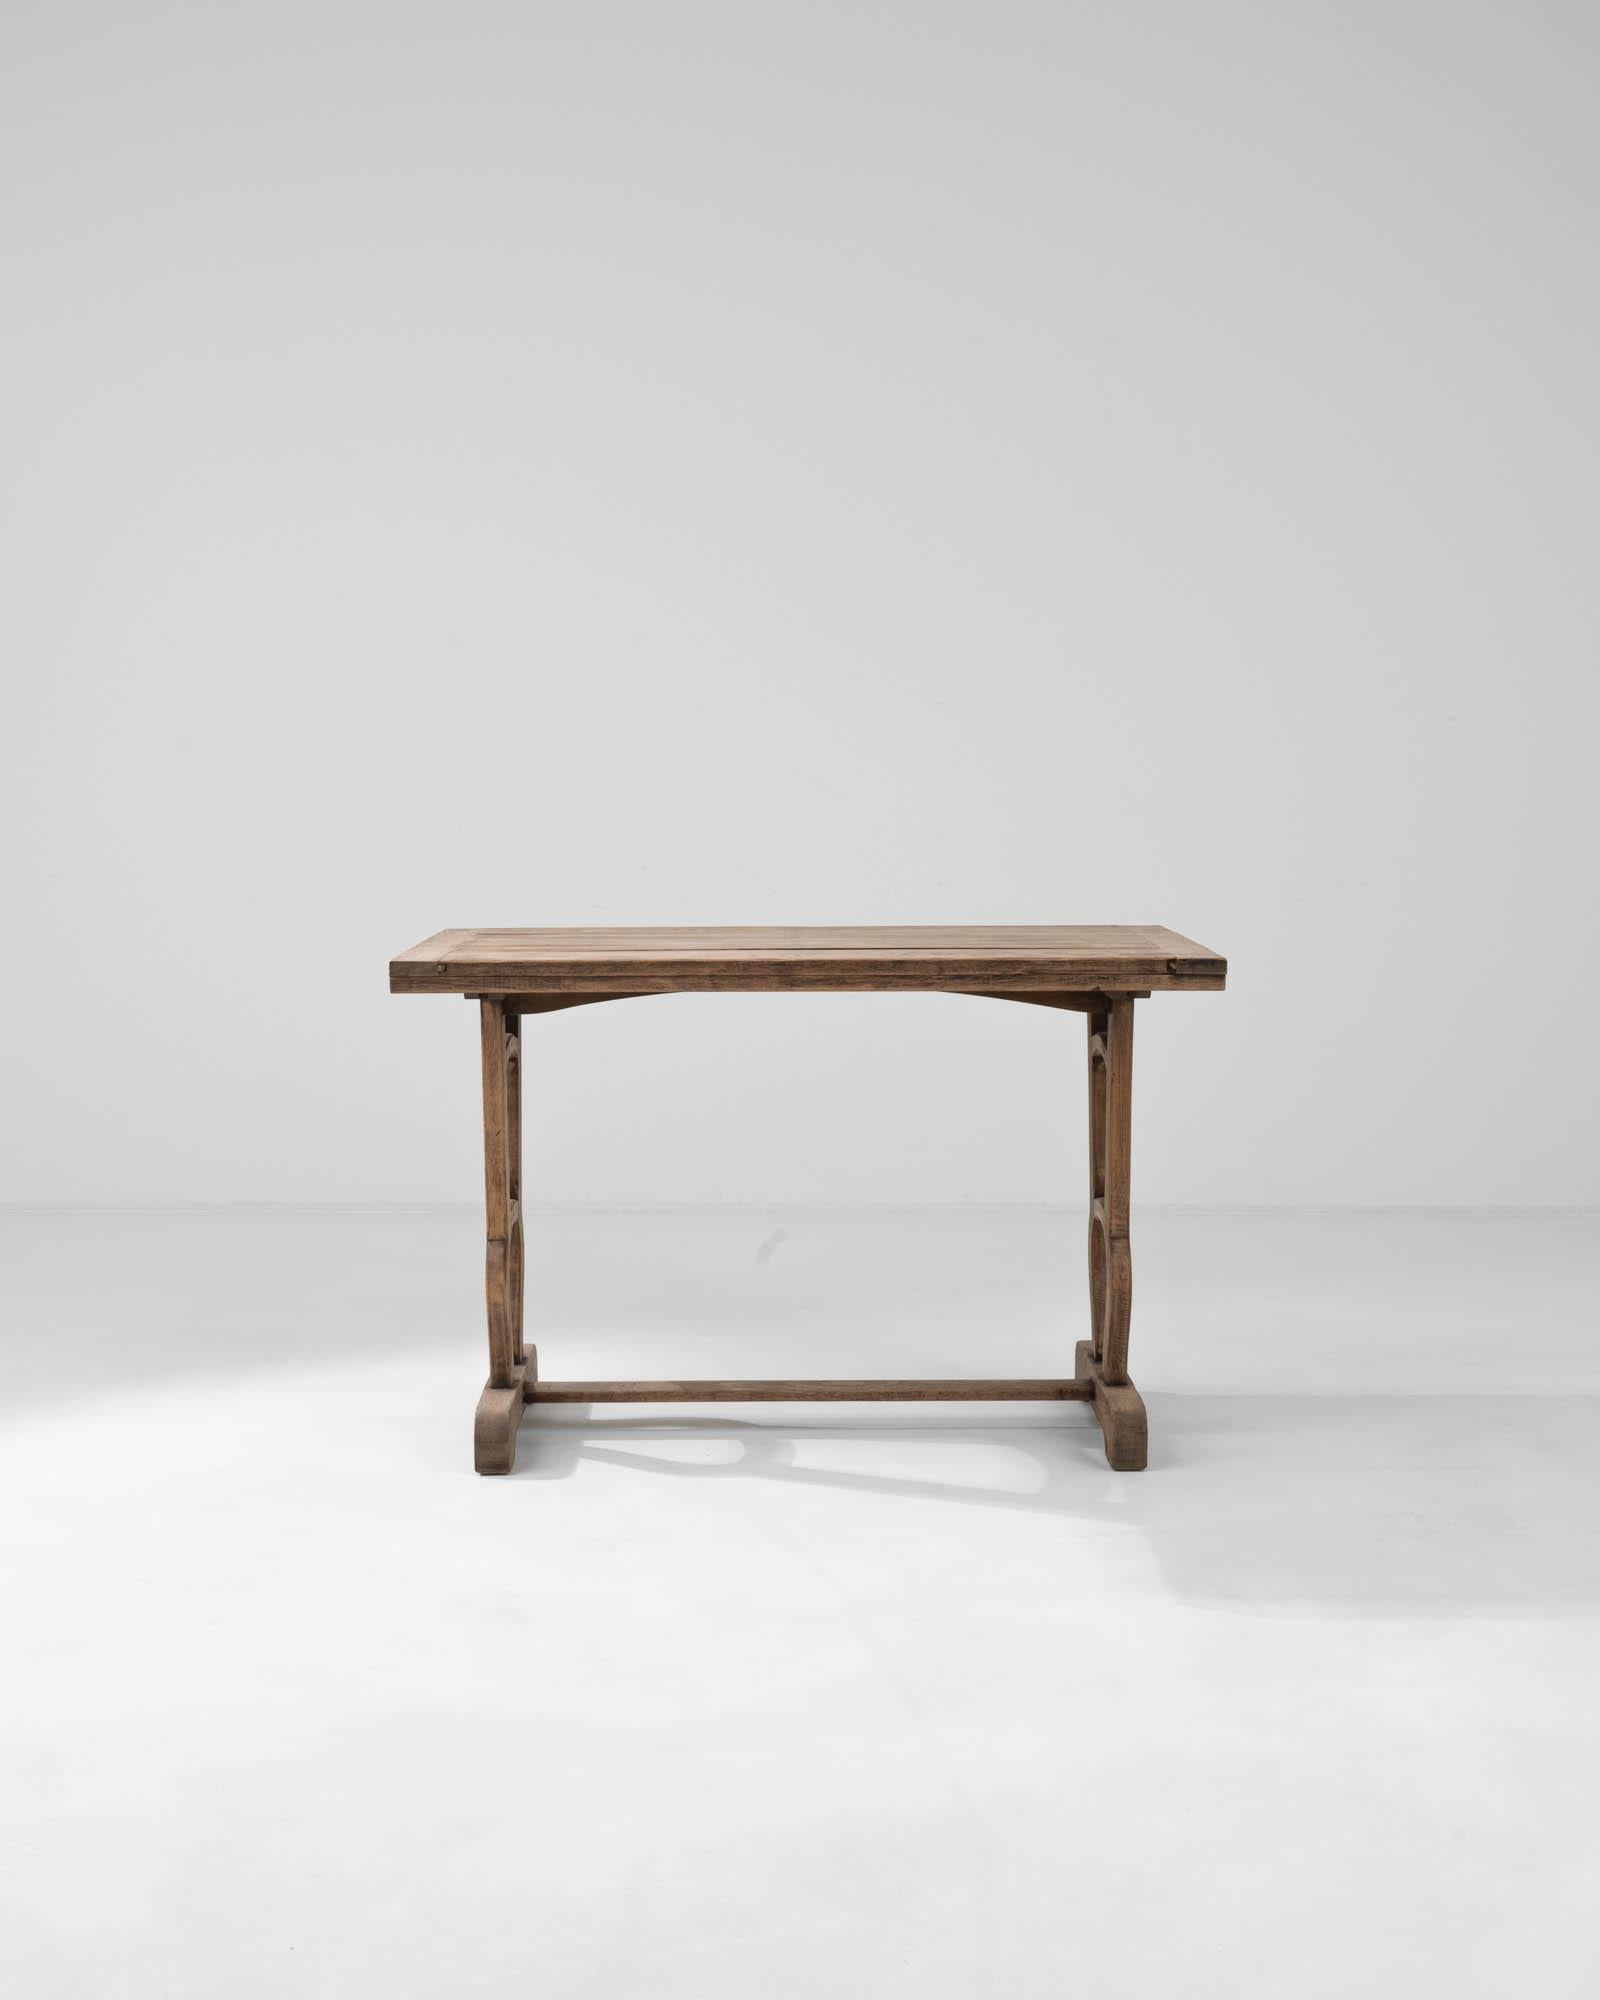 Experience the charm and sophistication of French design with this elegant 20th Century French Wooden Table. Crafted from high-quality wood, this table stands out with its distinctively shaped legs that blend both stability and style, featuring